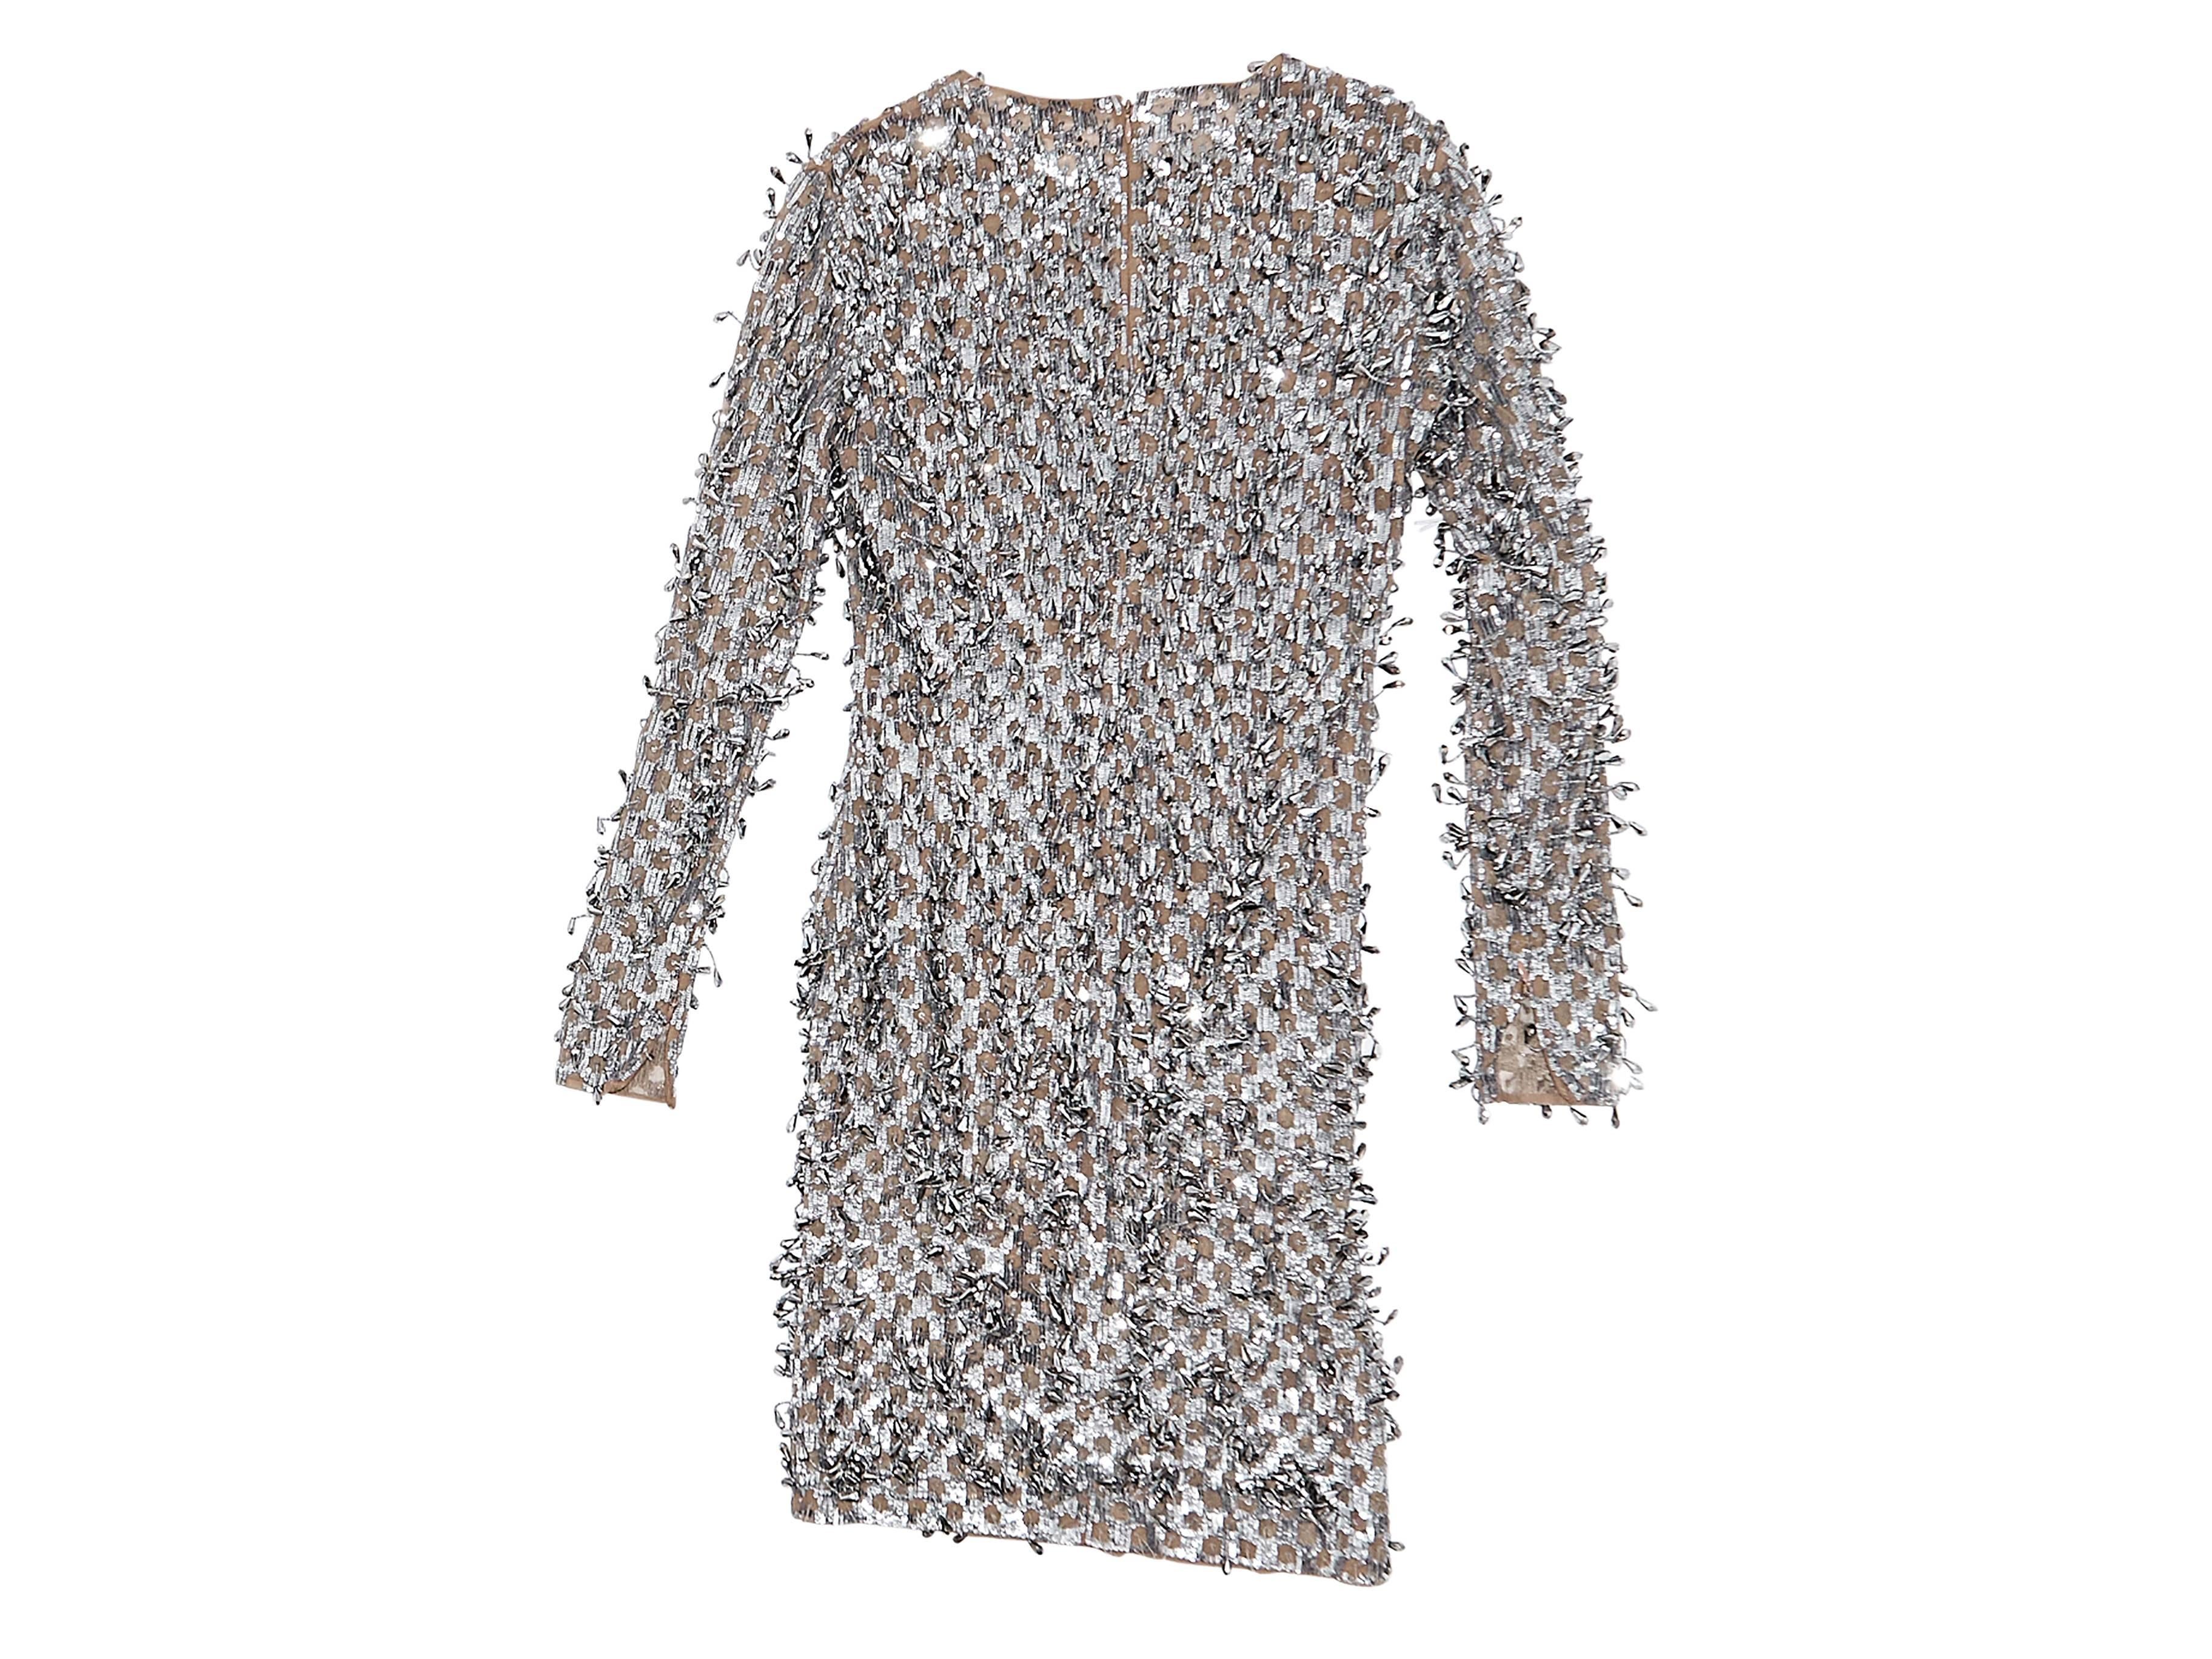 Product details:  Silver sequin embellished dress by Michael Kors.  From the 2016 runway collection.  Jewelneck.  Long sleeves.  Concealed back zip closure.  Nude mesh lining with inner attached bodysuit. Size 4
Condition: Pre-owned. Very